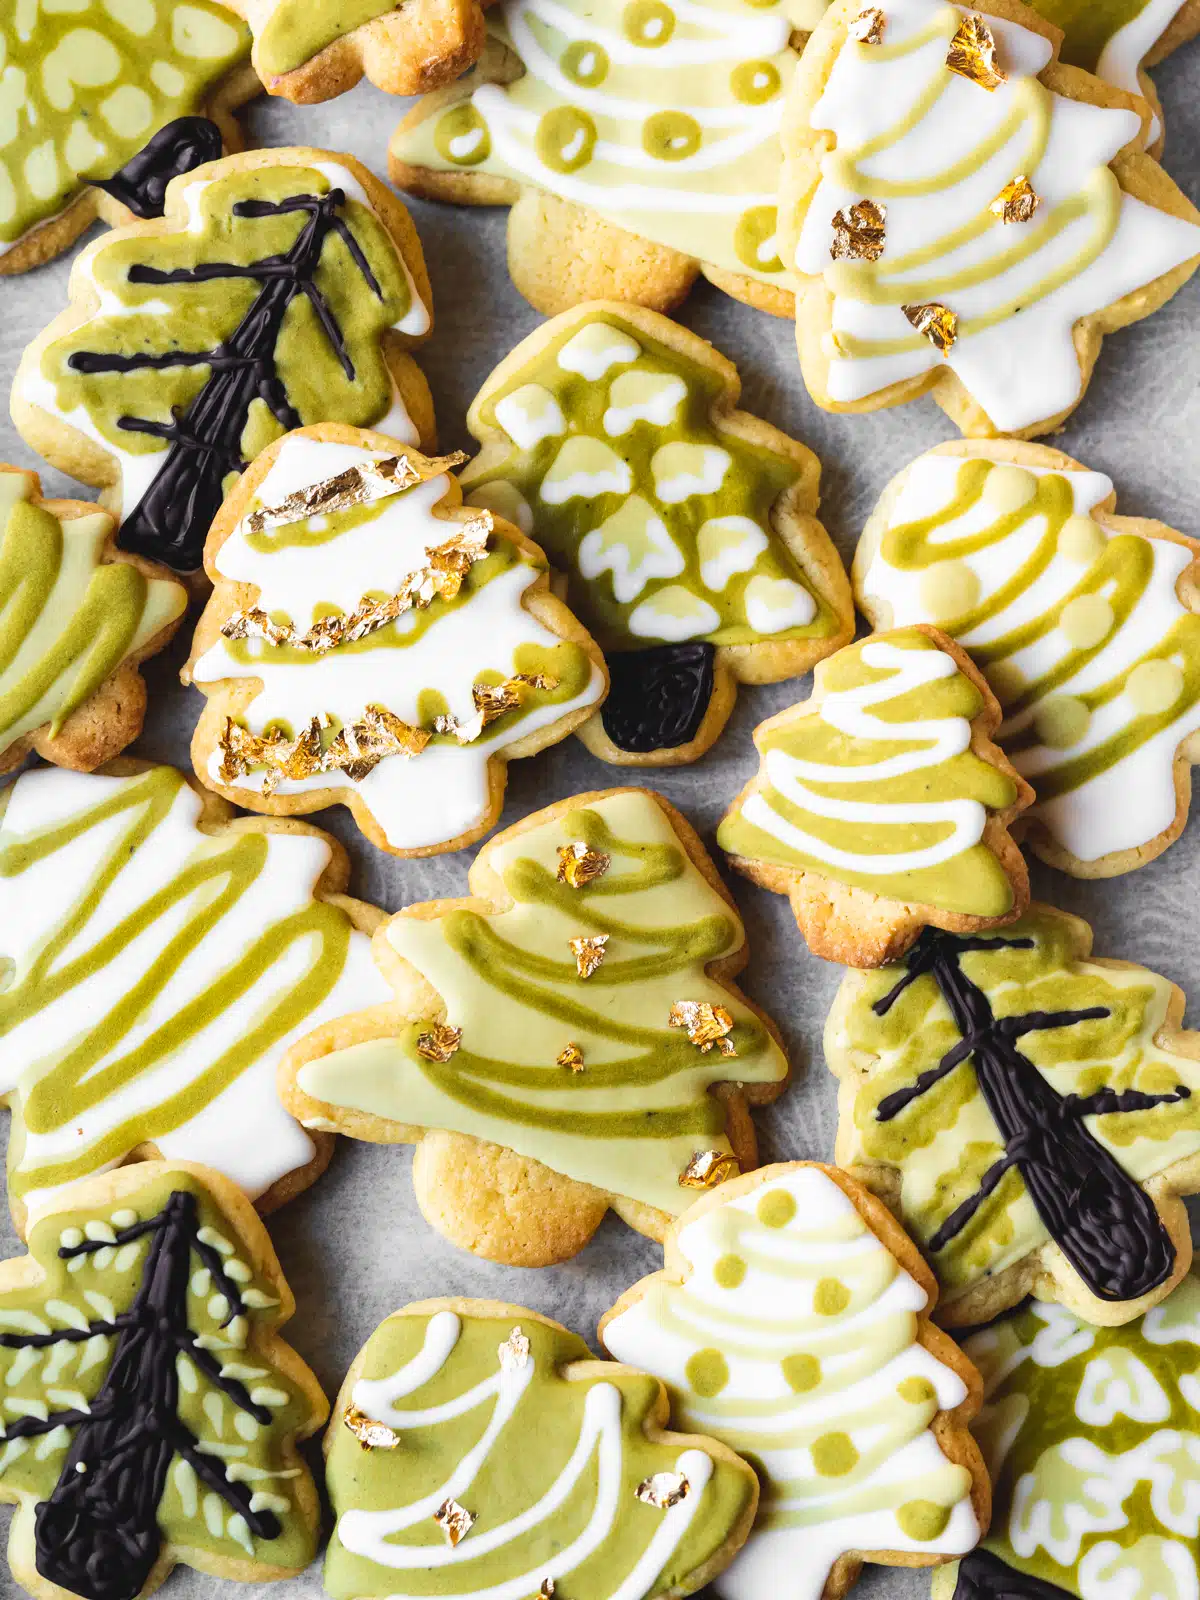 A plate of holiday cookies decorated with green and white icing.